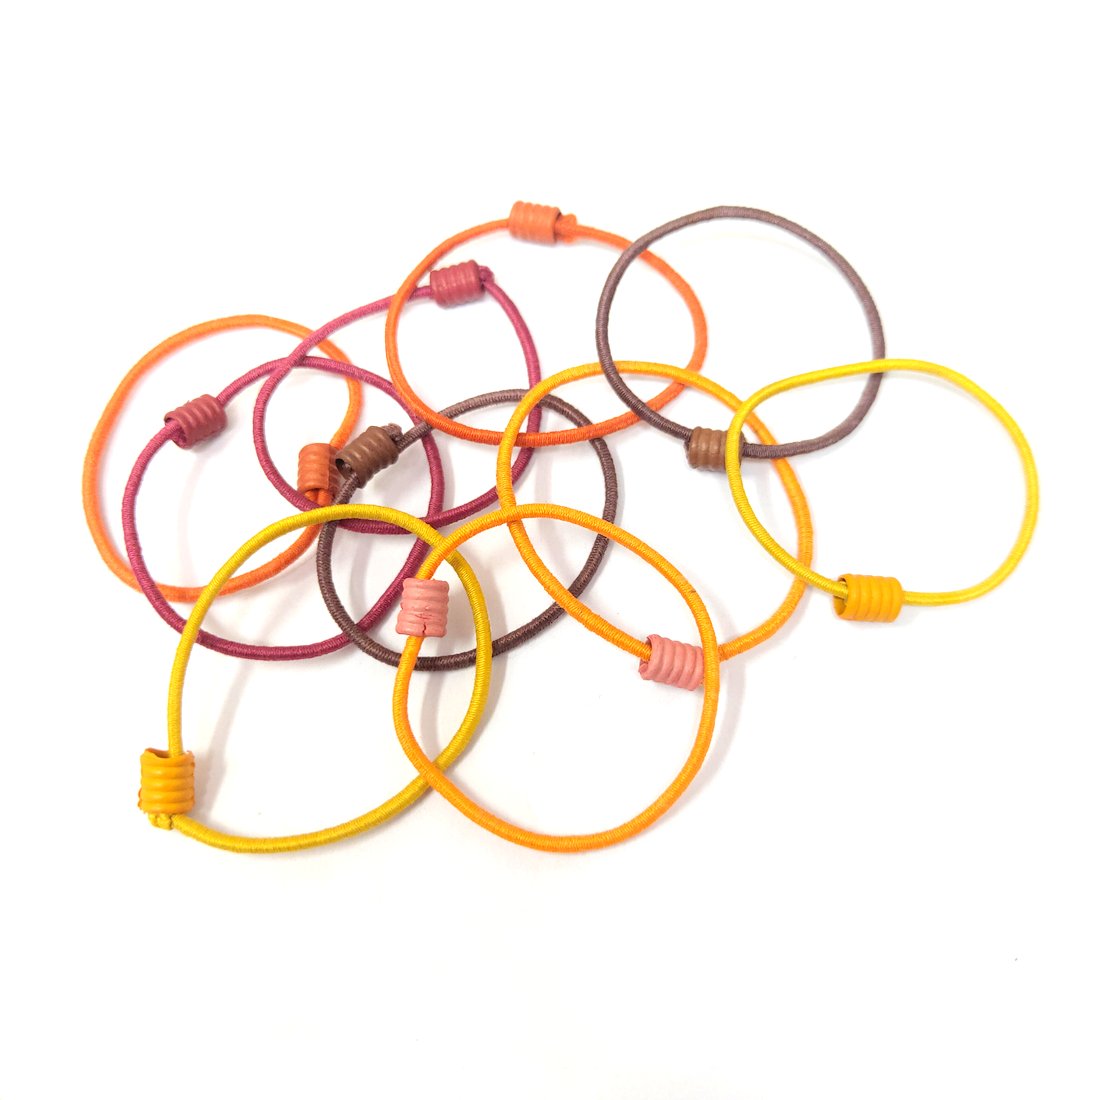 Anokhi Ada small size Elastic Rubber for Girls and Women (15-22 Ponytail Holders, 10 Pcs Assorted Colour Rubber)